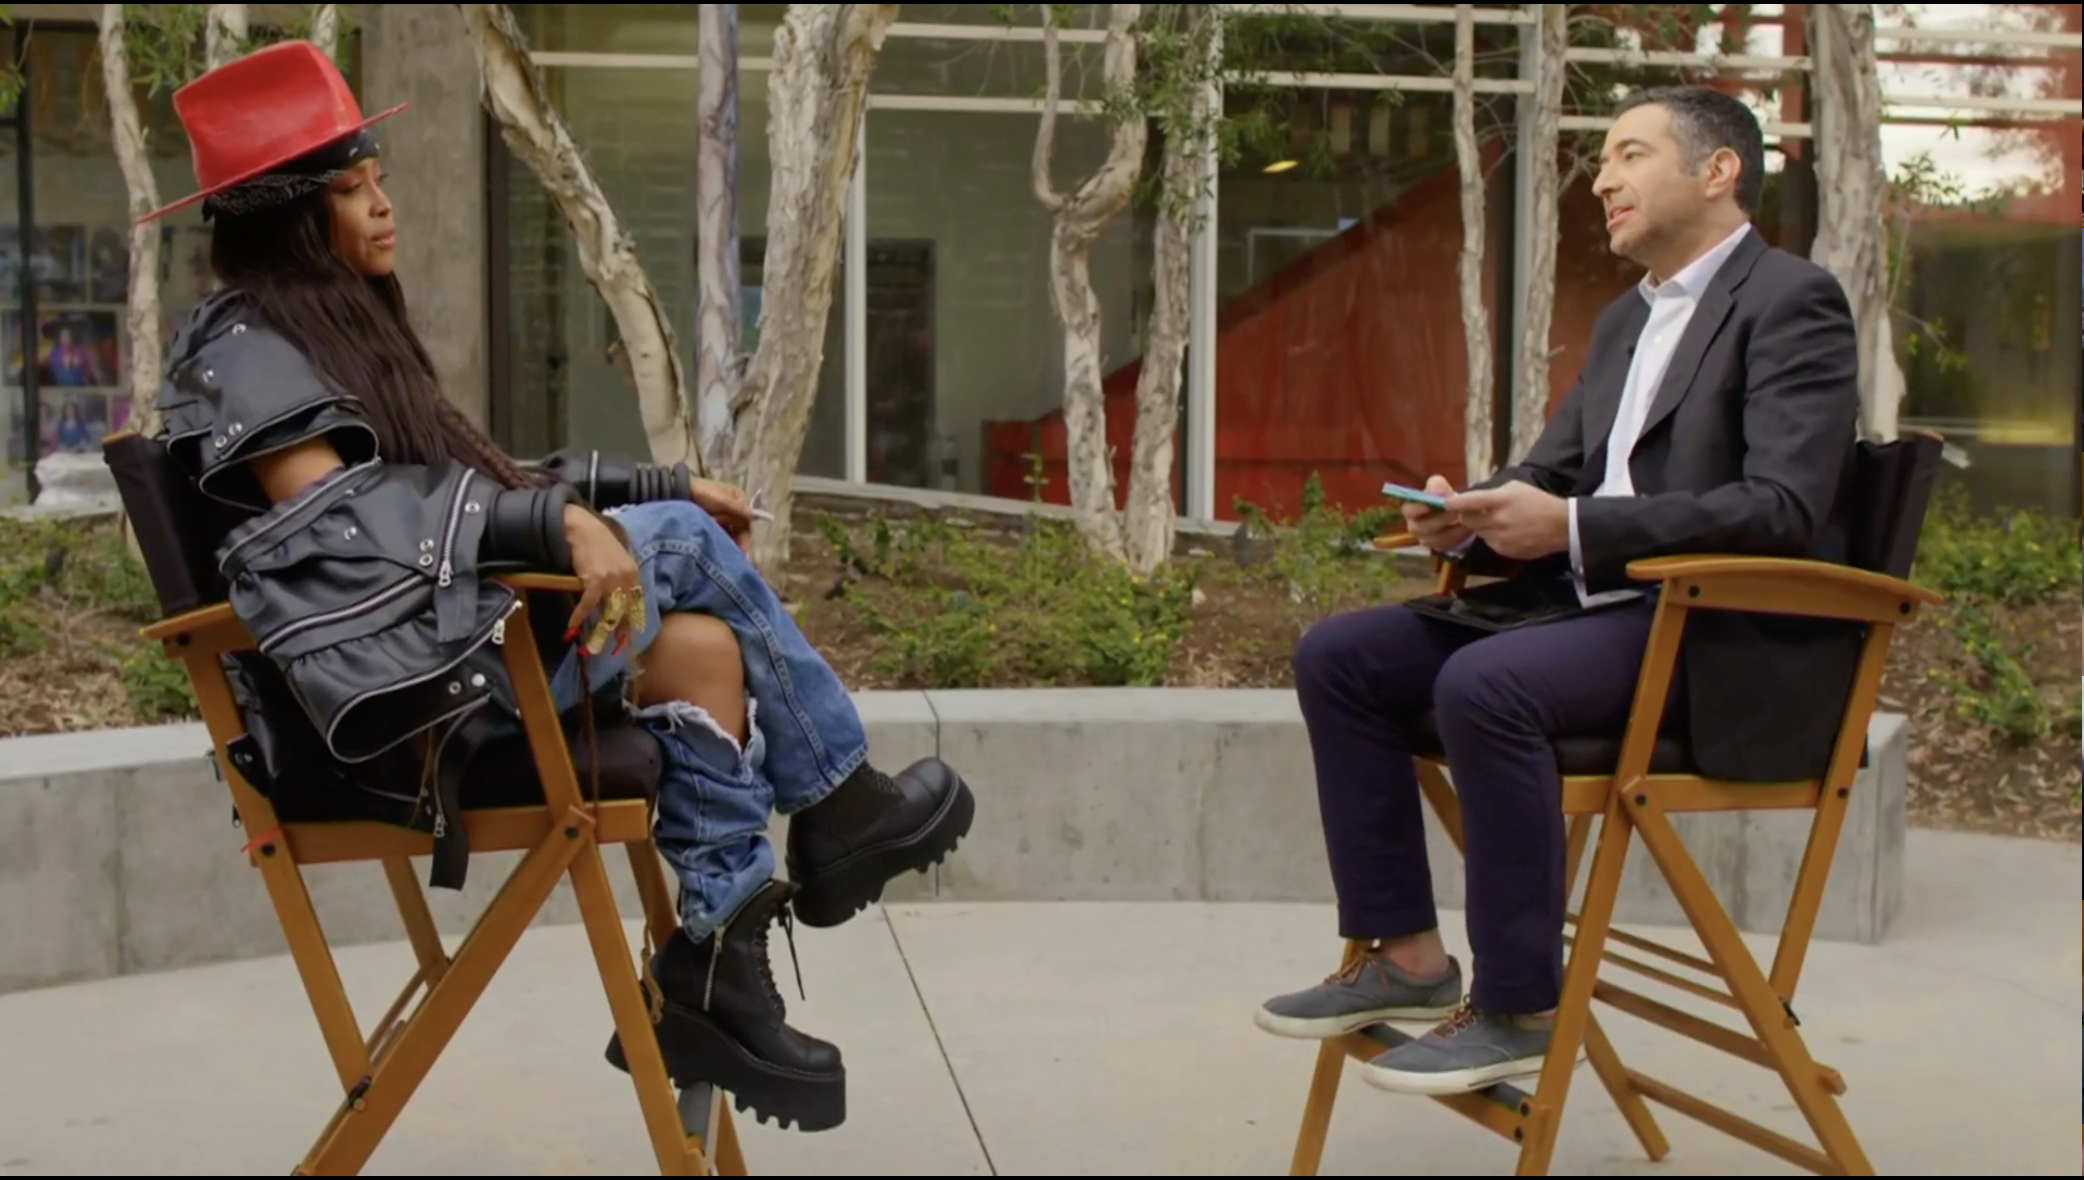 Erykah Badu and Ari Melber face each other in chairs on an outdoor patio.